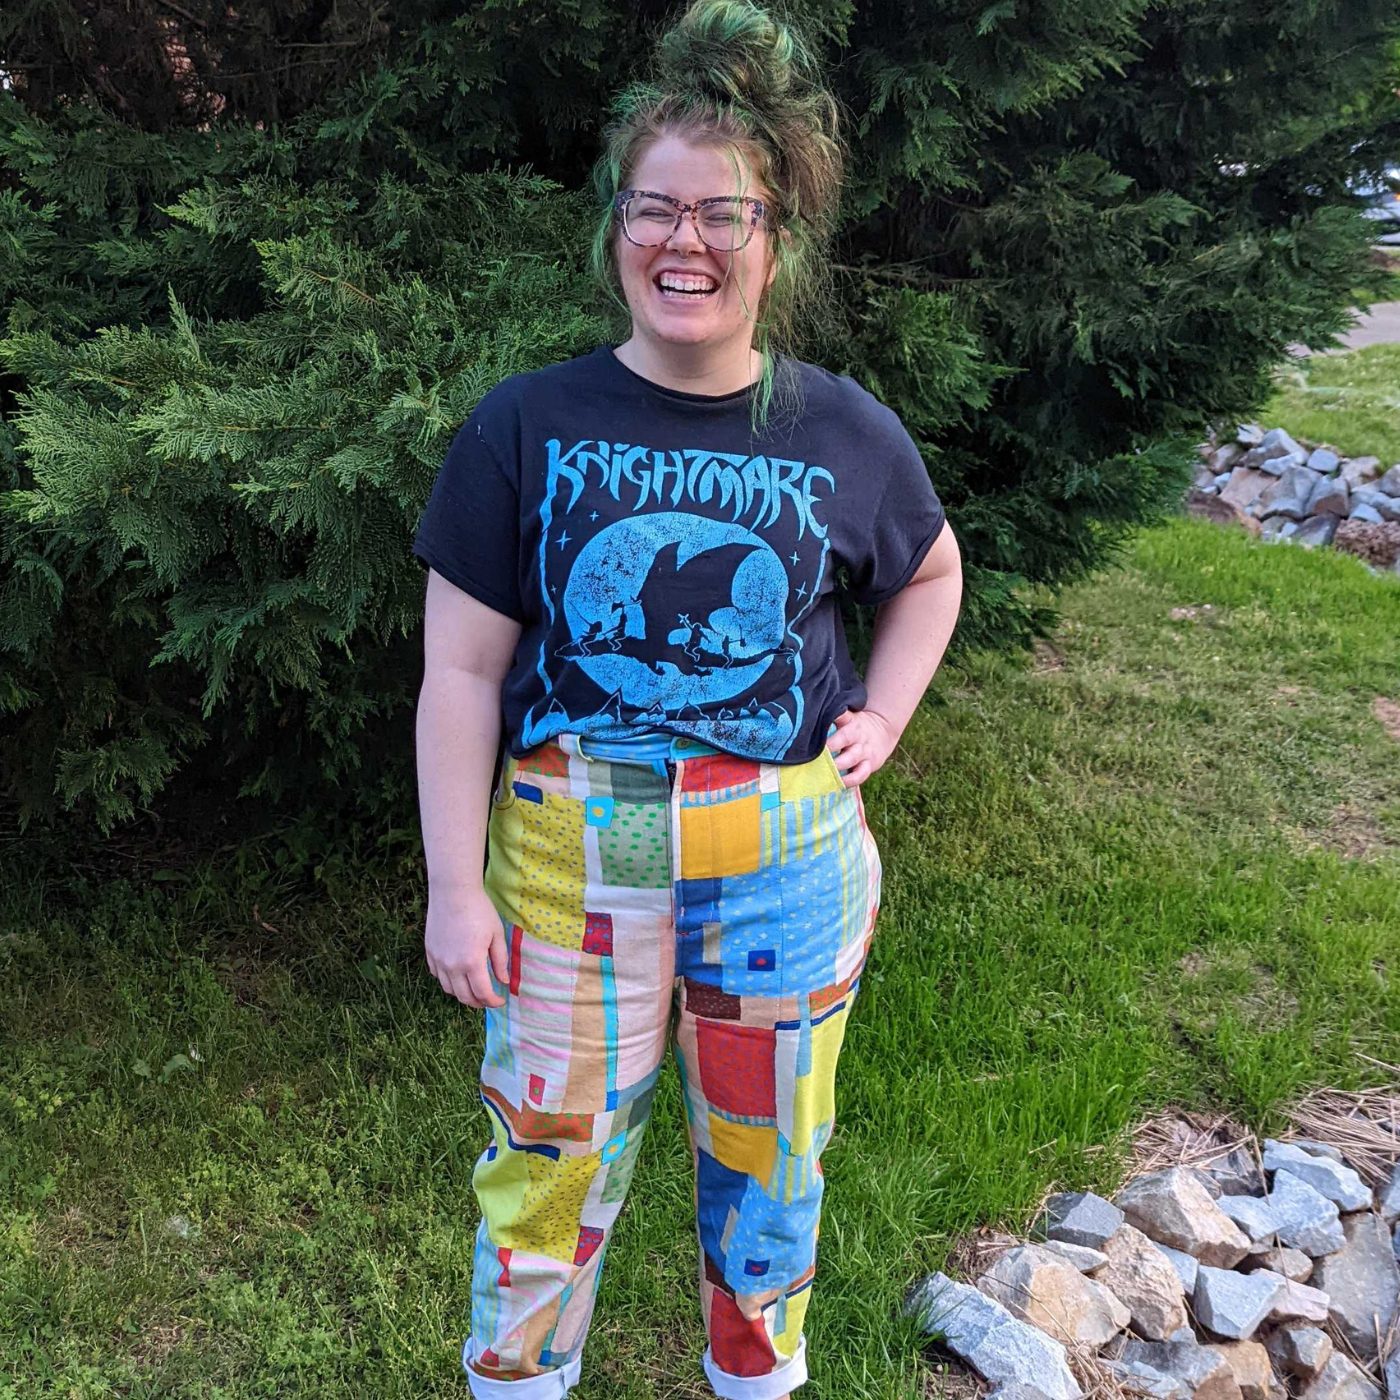 Nikki stands in front of the camera and is laughing. She is wearing a shirt for the band Knightmare and wearing pants featuring a design that looks like patchwork. Small squares and rectangles in varied sizes cover the design in yellow, red, blue, green and more Some blocks have stripes, others have dots. Both of her arms are held up in the air over her head. Her left leg is slightly in the air.